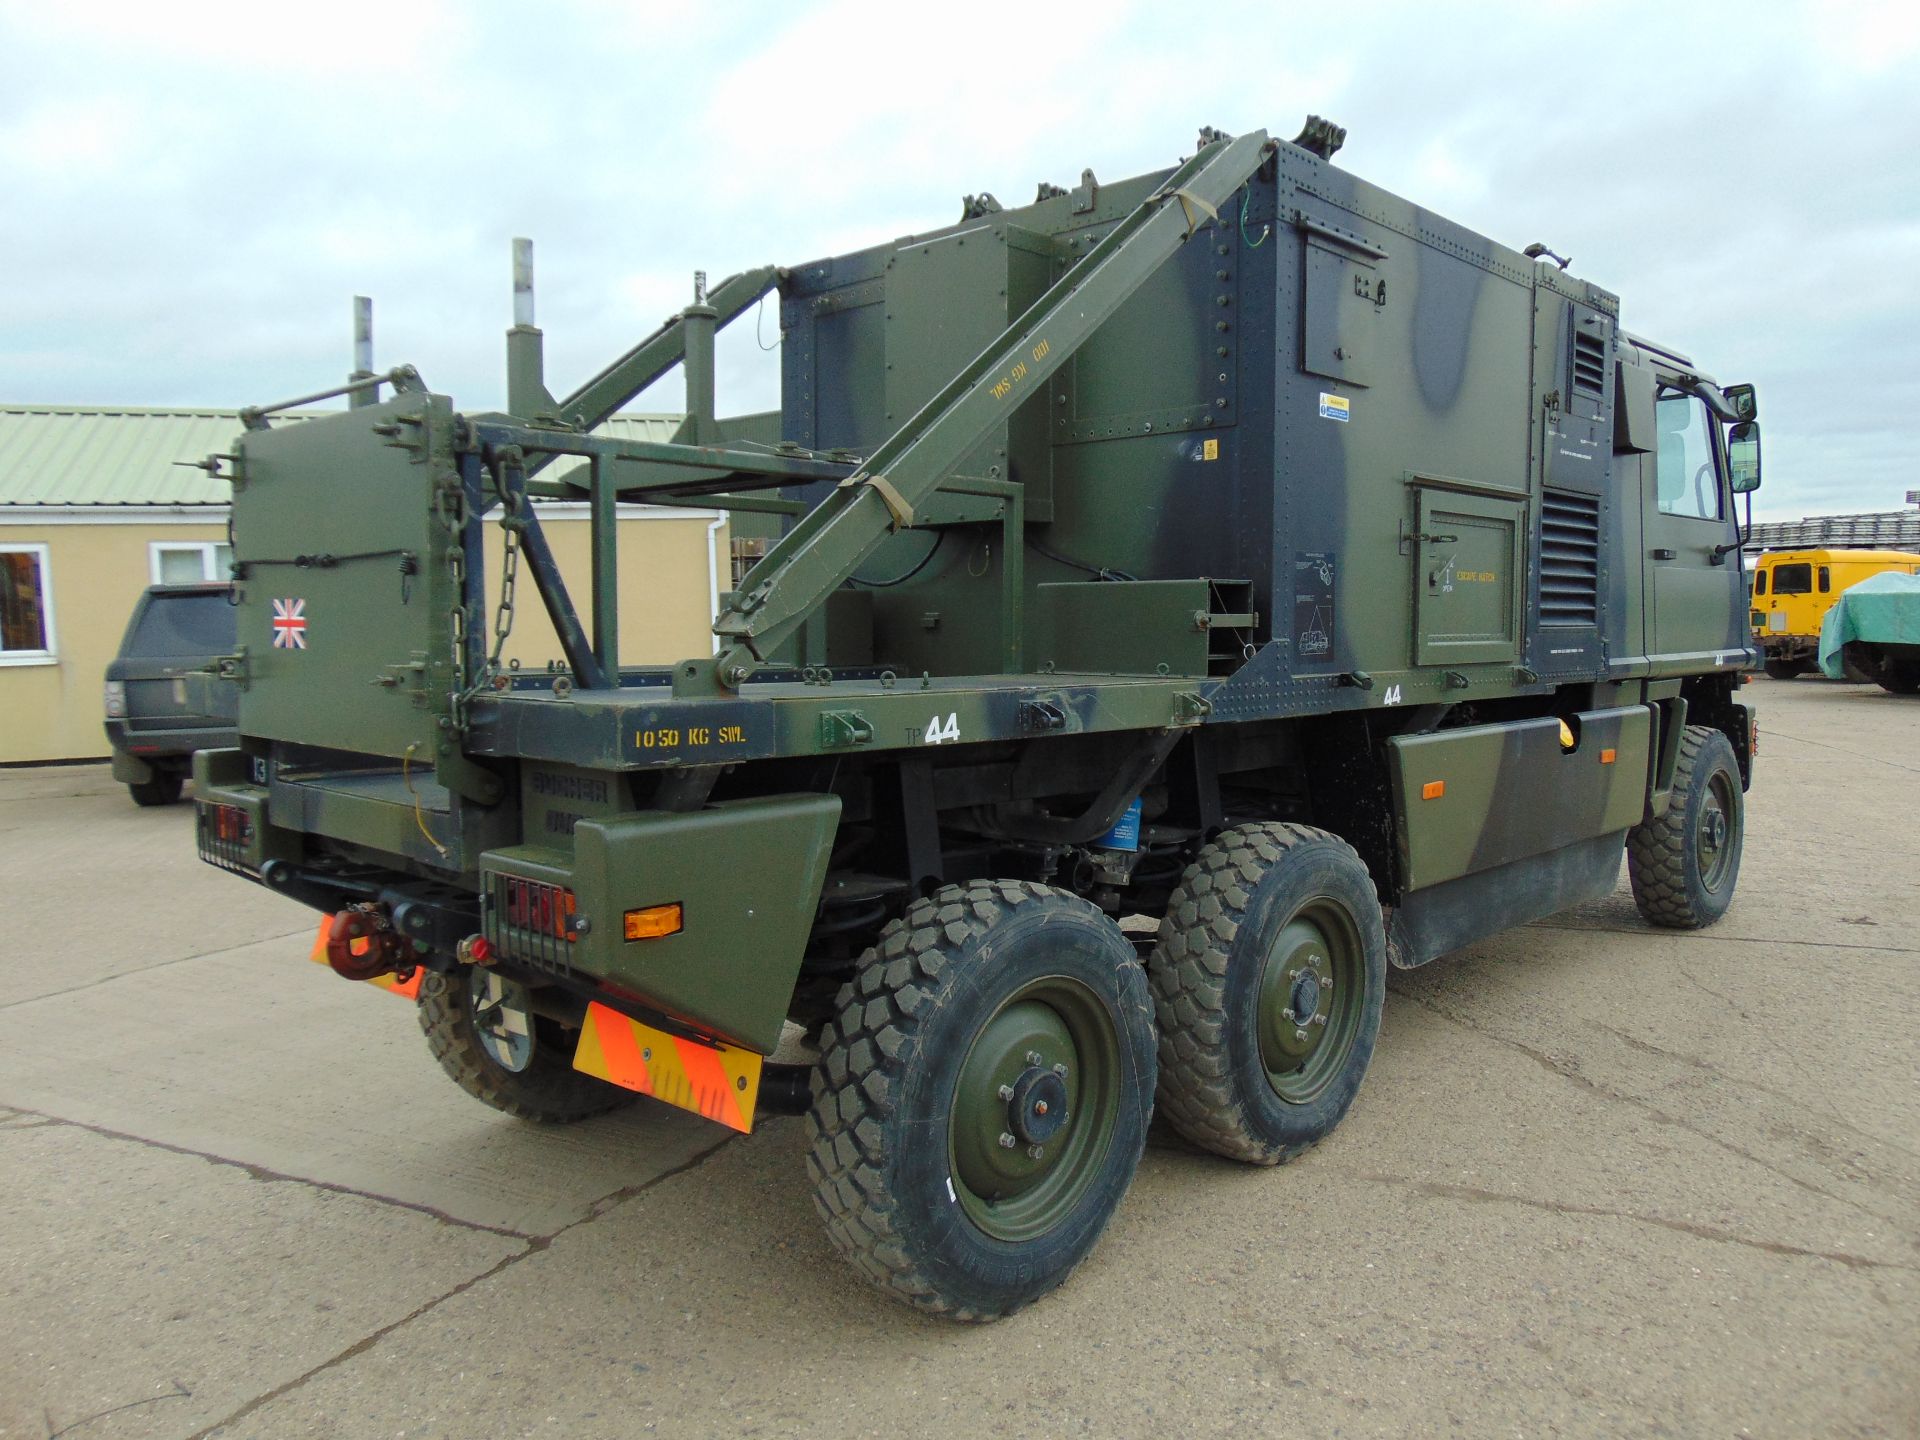 Ex Reserve Left Hand Drive Mowag Bucher Duro II 6x6 High-Mobility Tactical Vehicle - Image 6 of 15